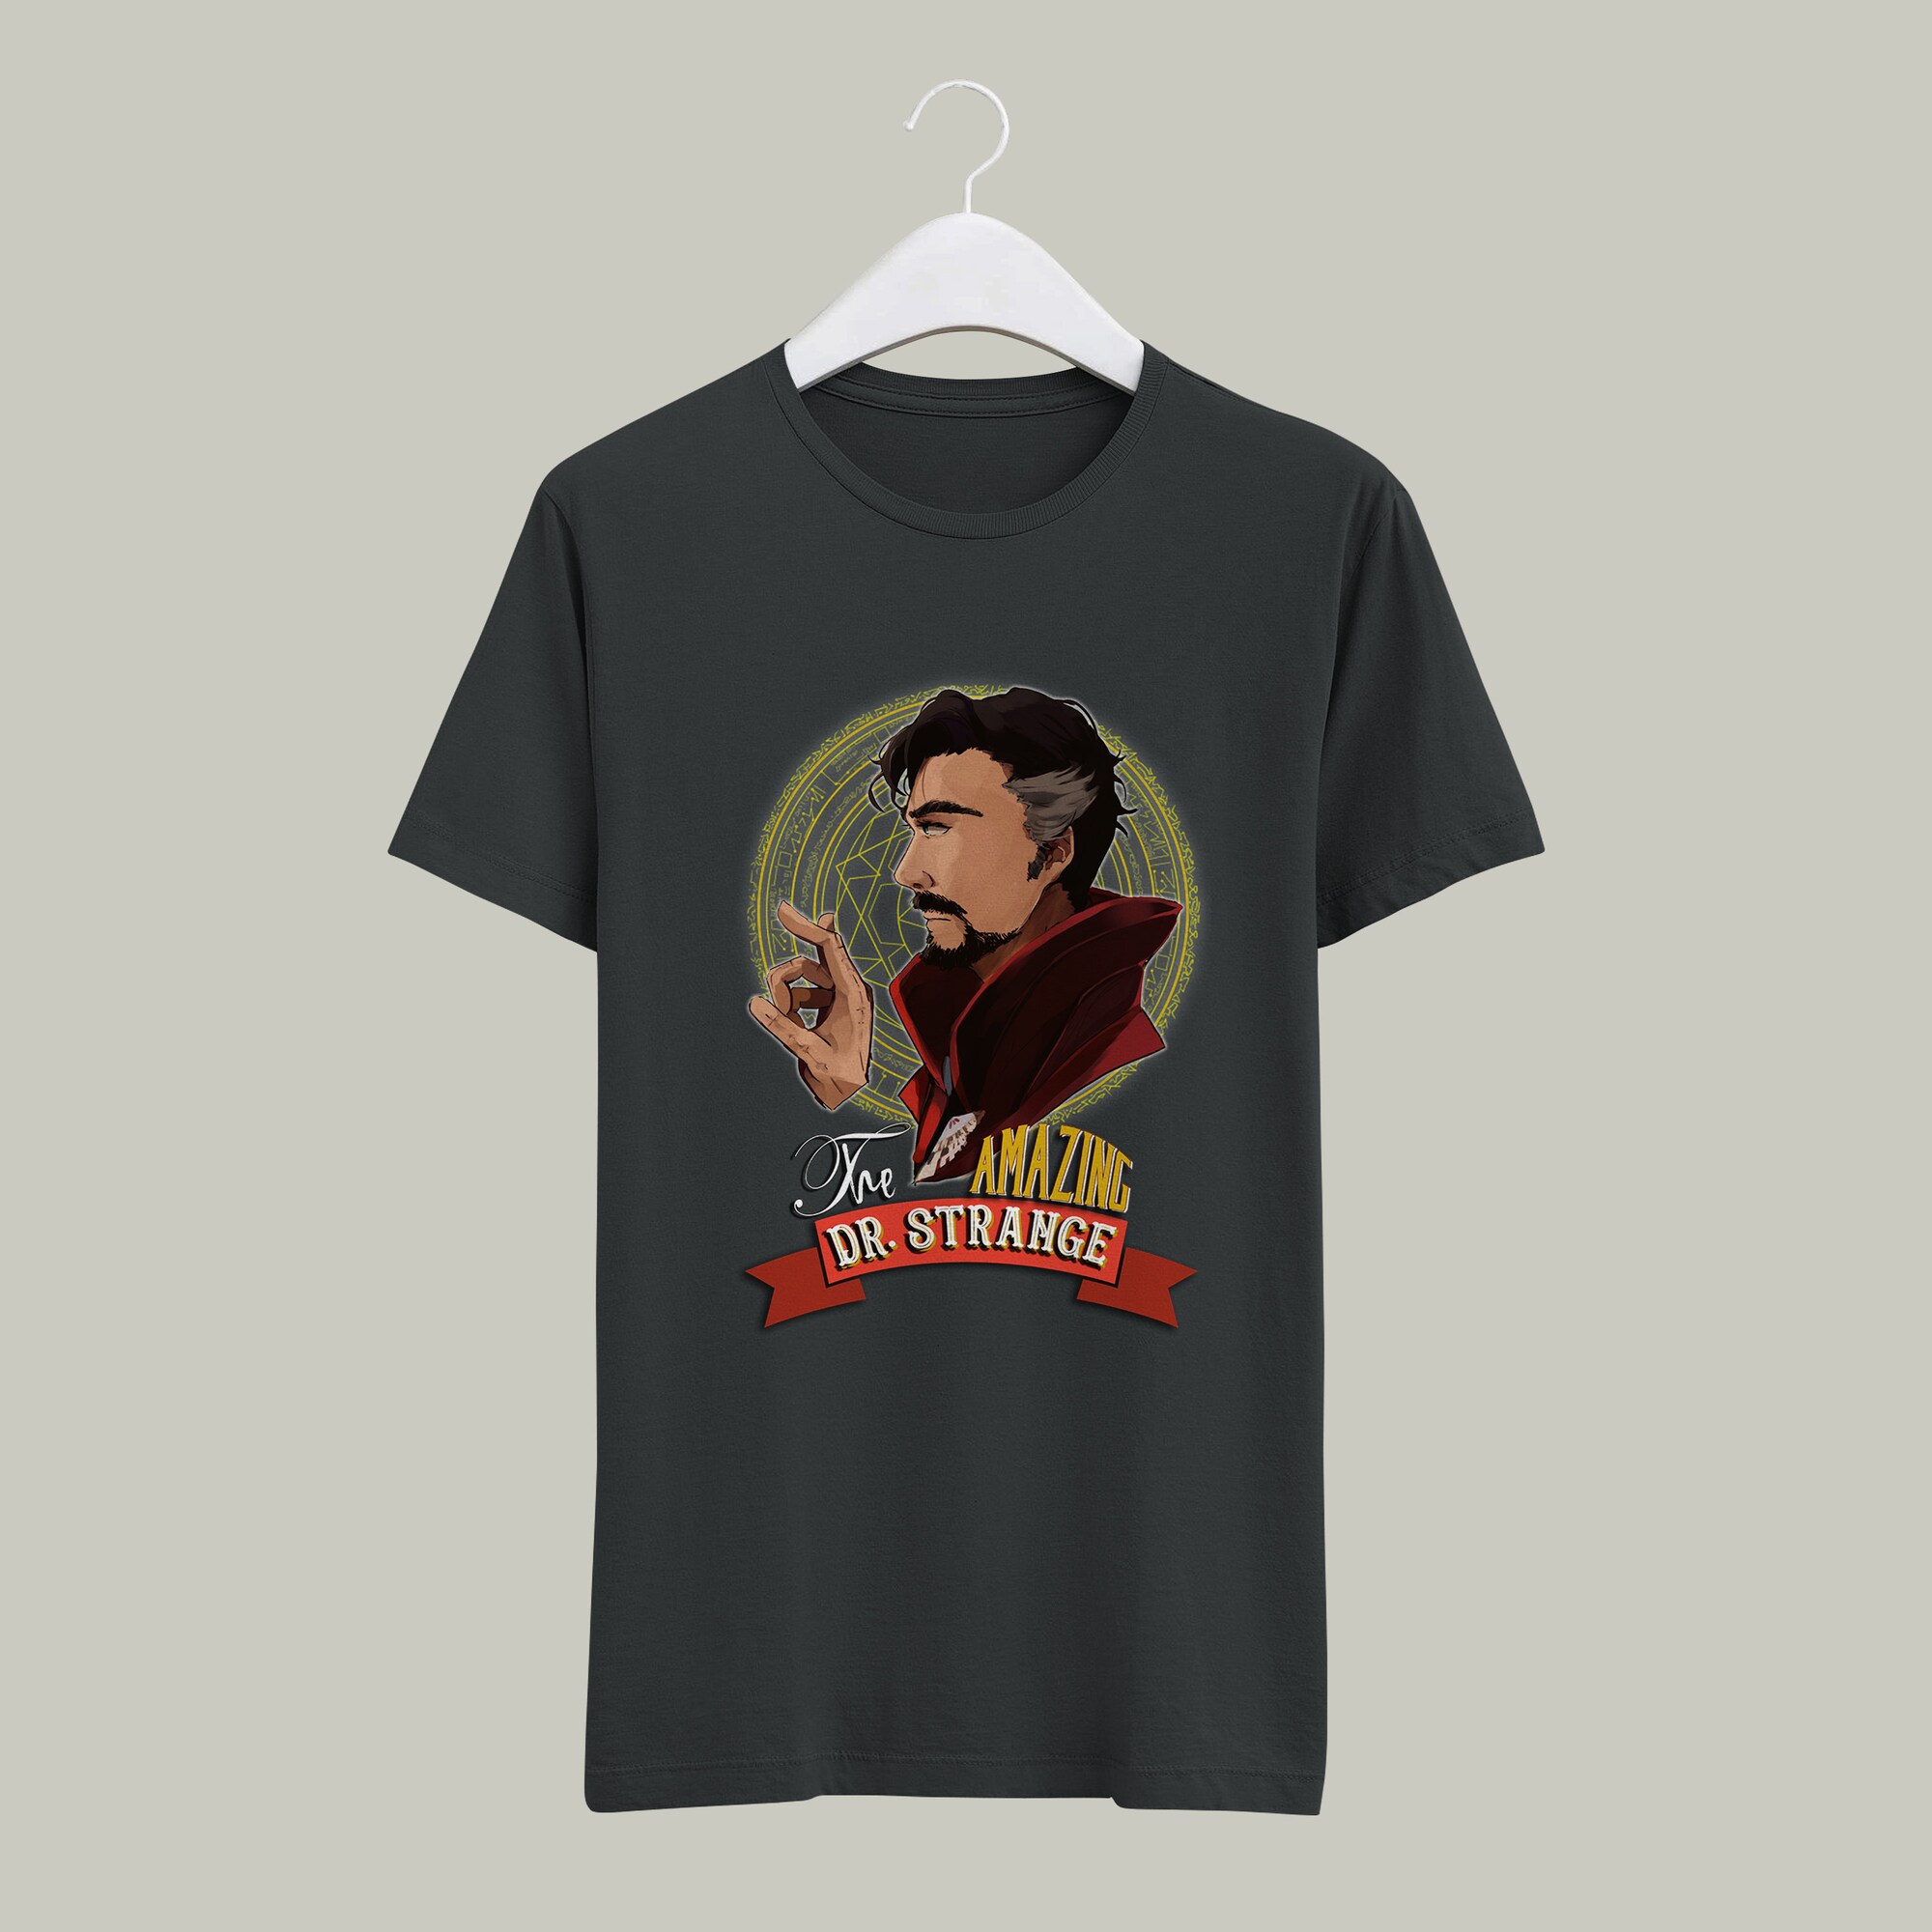 Discover The Amazing Dr. Strange T-Shirt